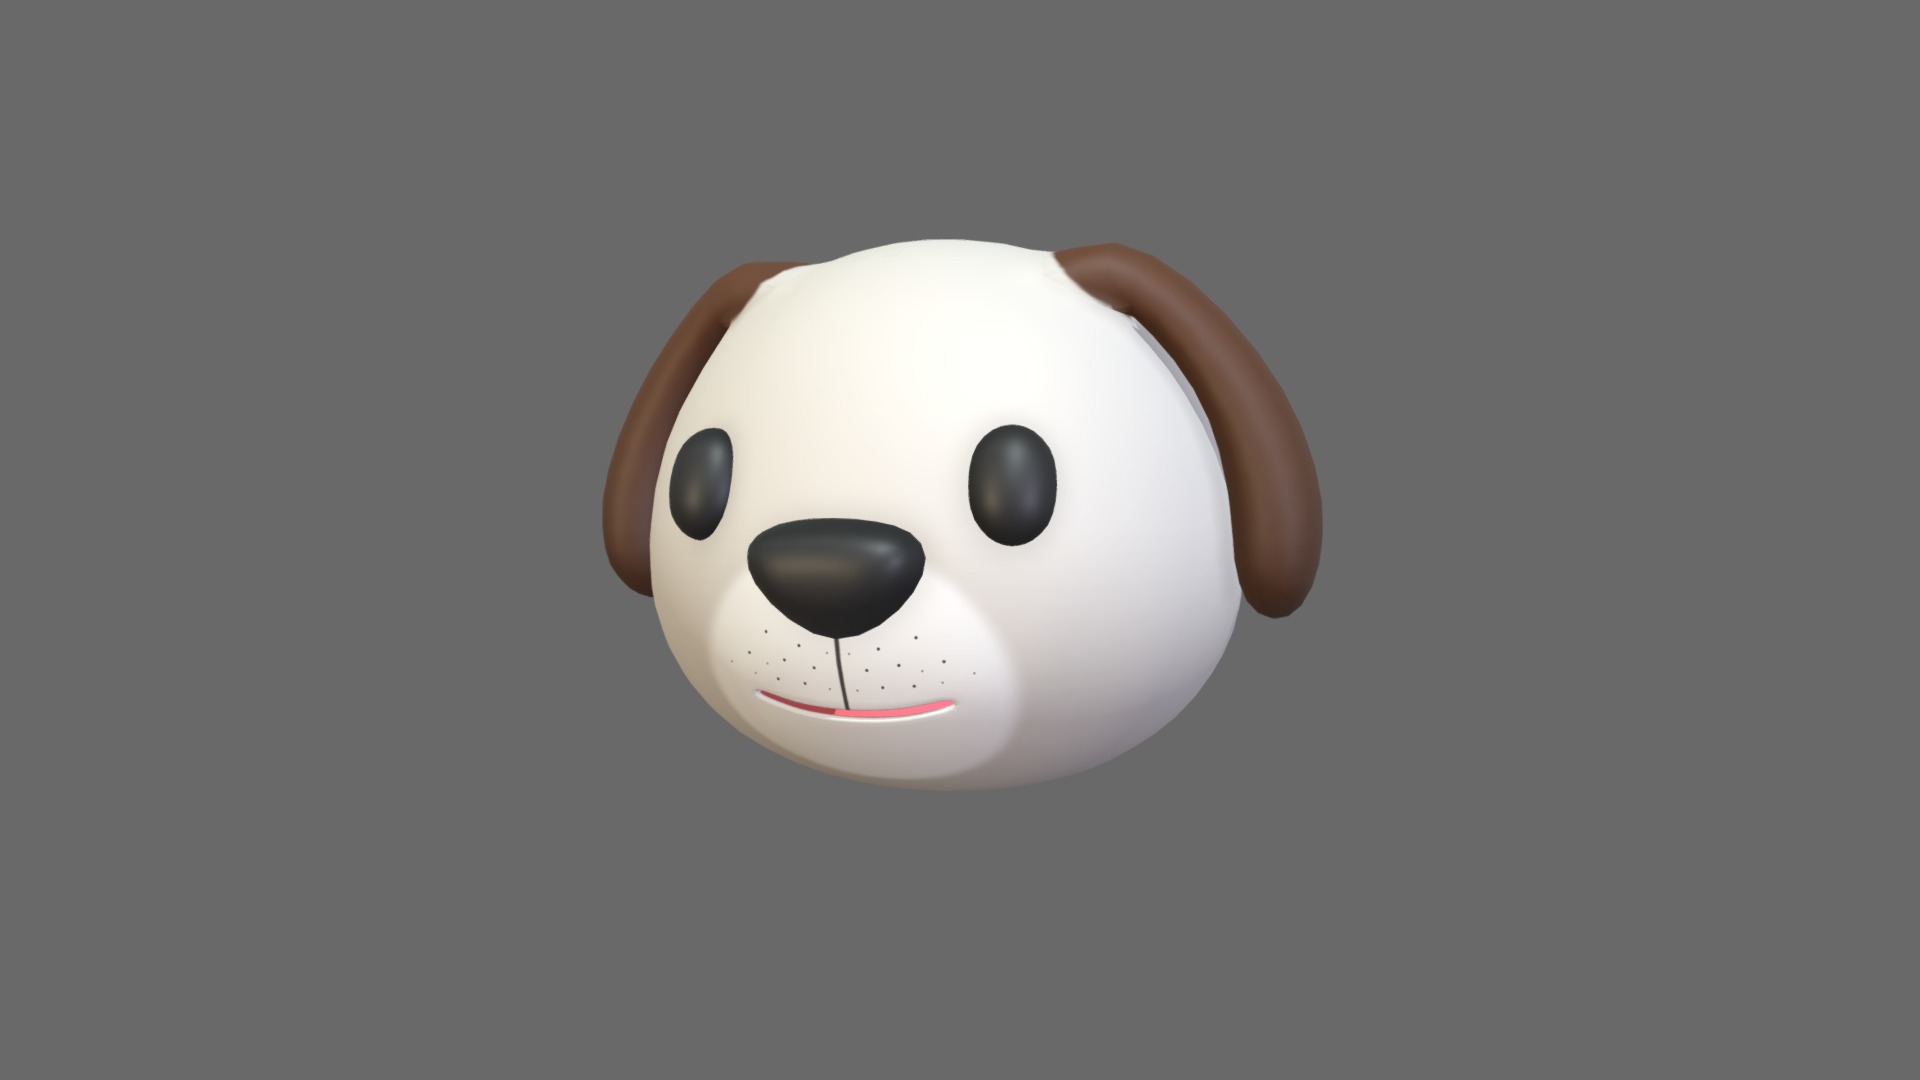 3D model Dog Head - This is a 3D model of the Dog Head. The 3D model is about a white and brown cartoon character.